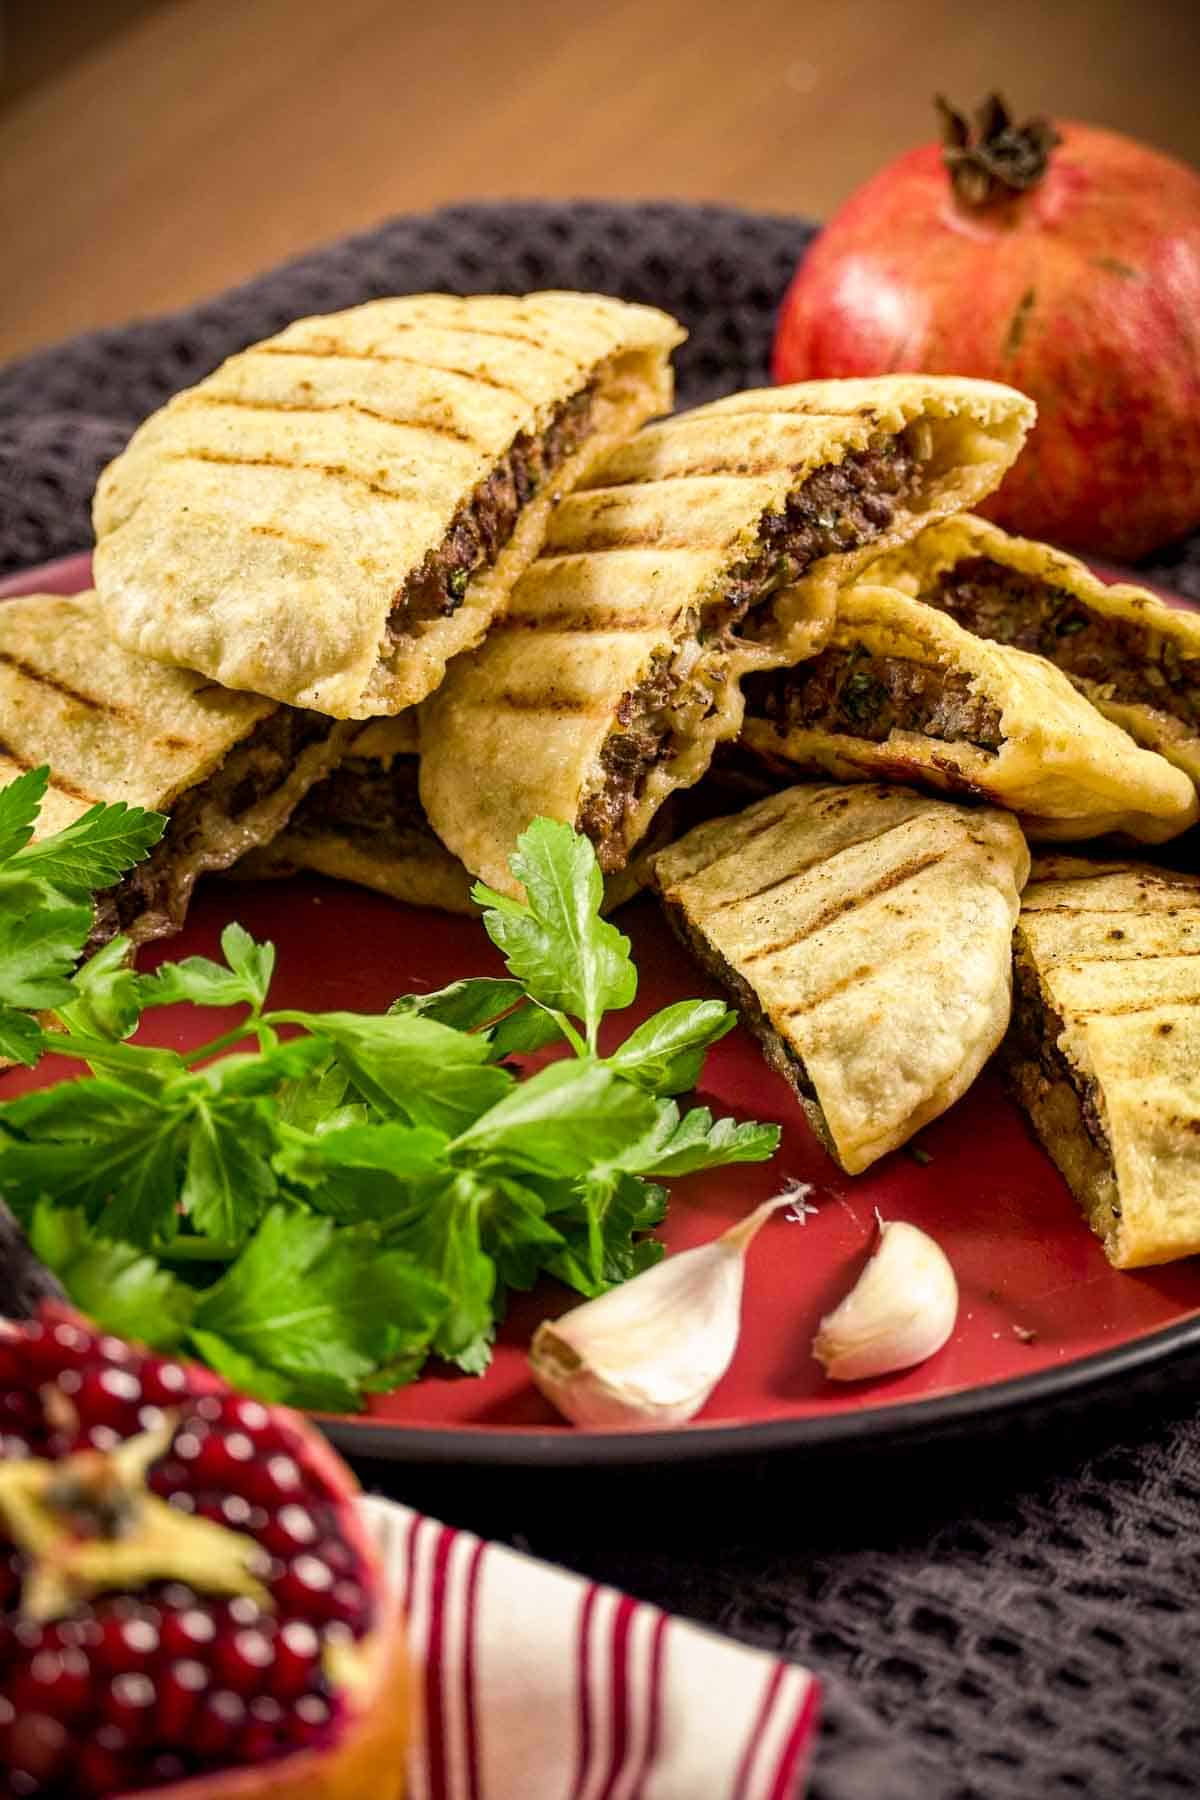 A close up view of arayes pitas, stuffed with beef.